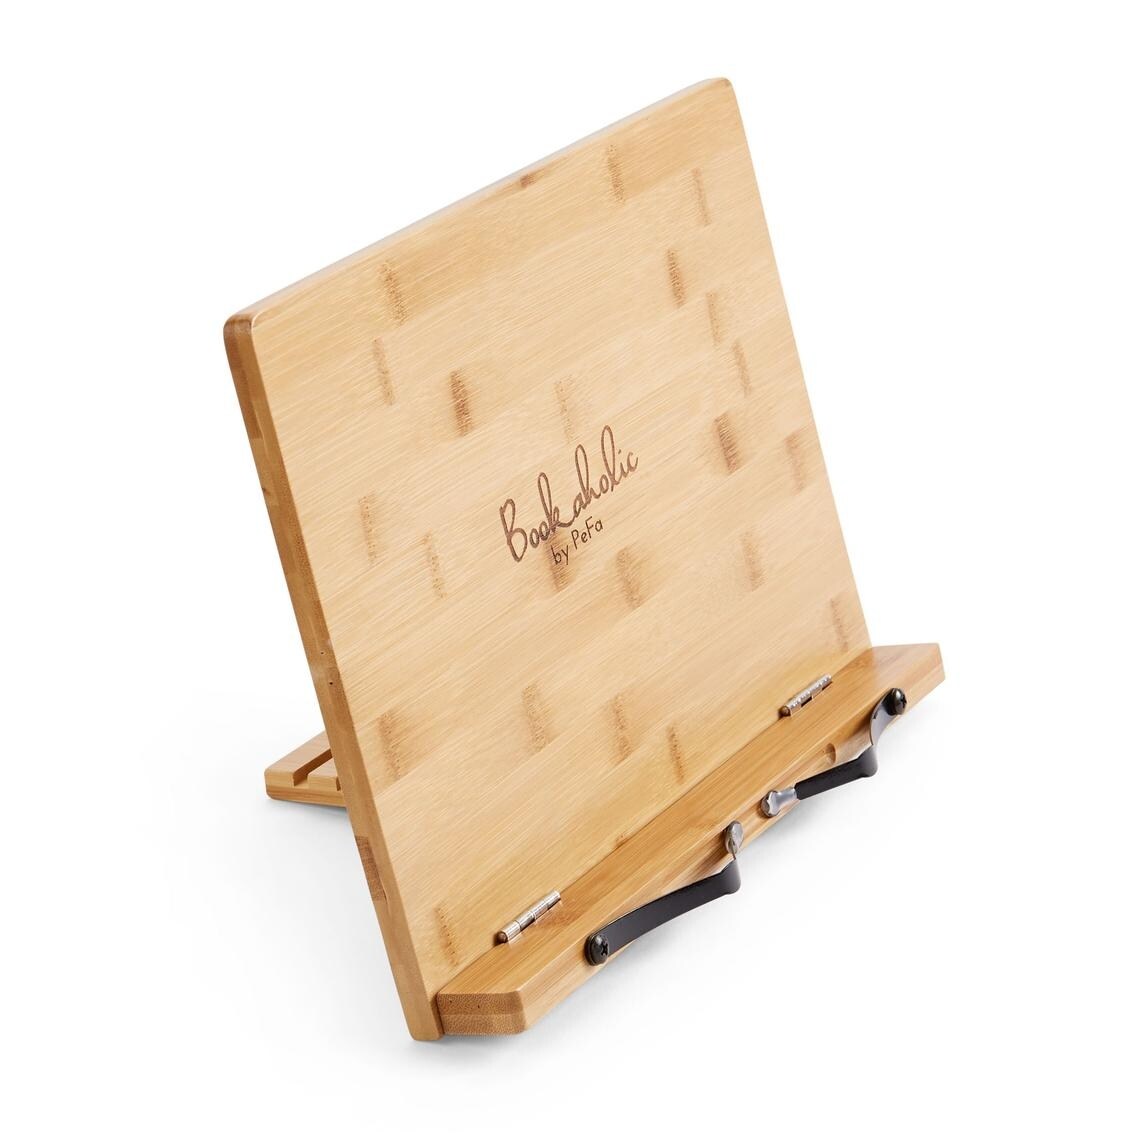 Organic Bamboo Book Stand, Wooden Cookbook Stand, Recipe holder, Wedding  Book, Housewarming Gift, Sustainable Gift - On Sale - Bed Bath & Beyond -  33137364